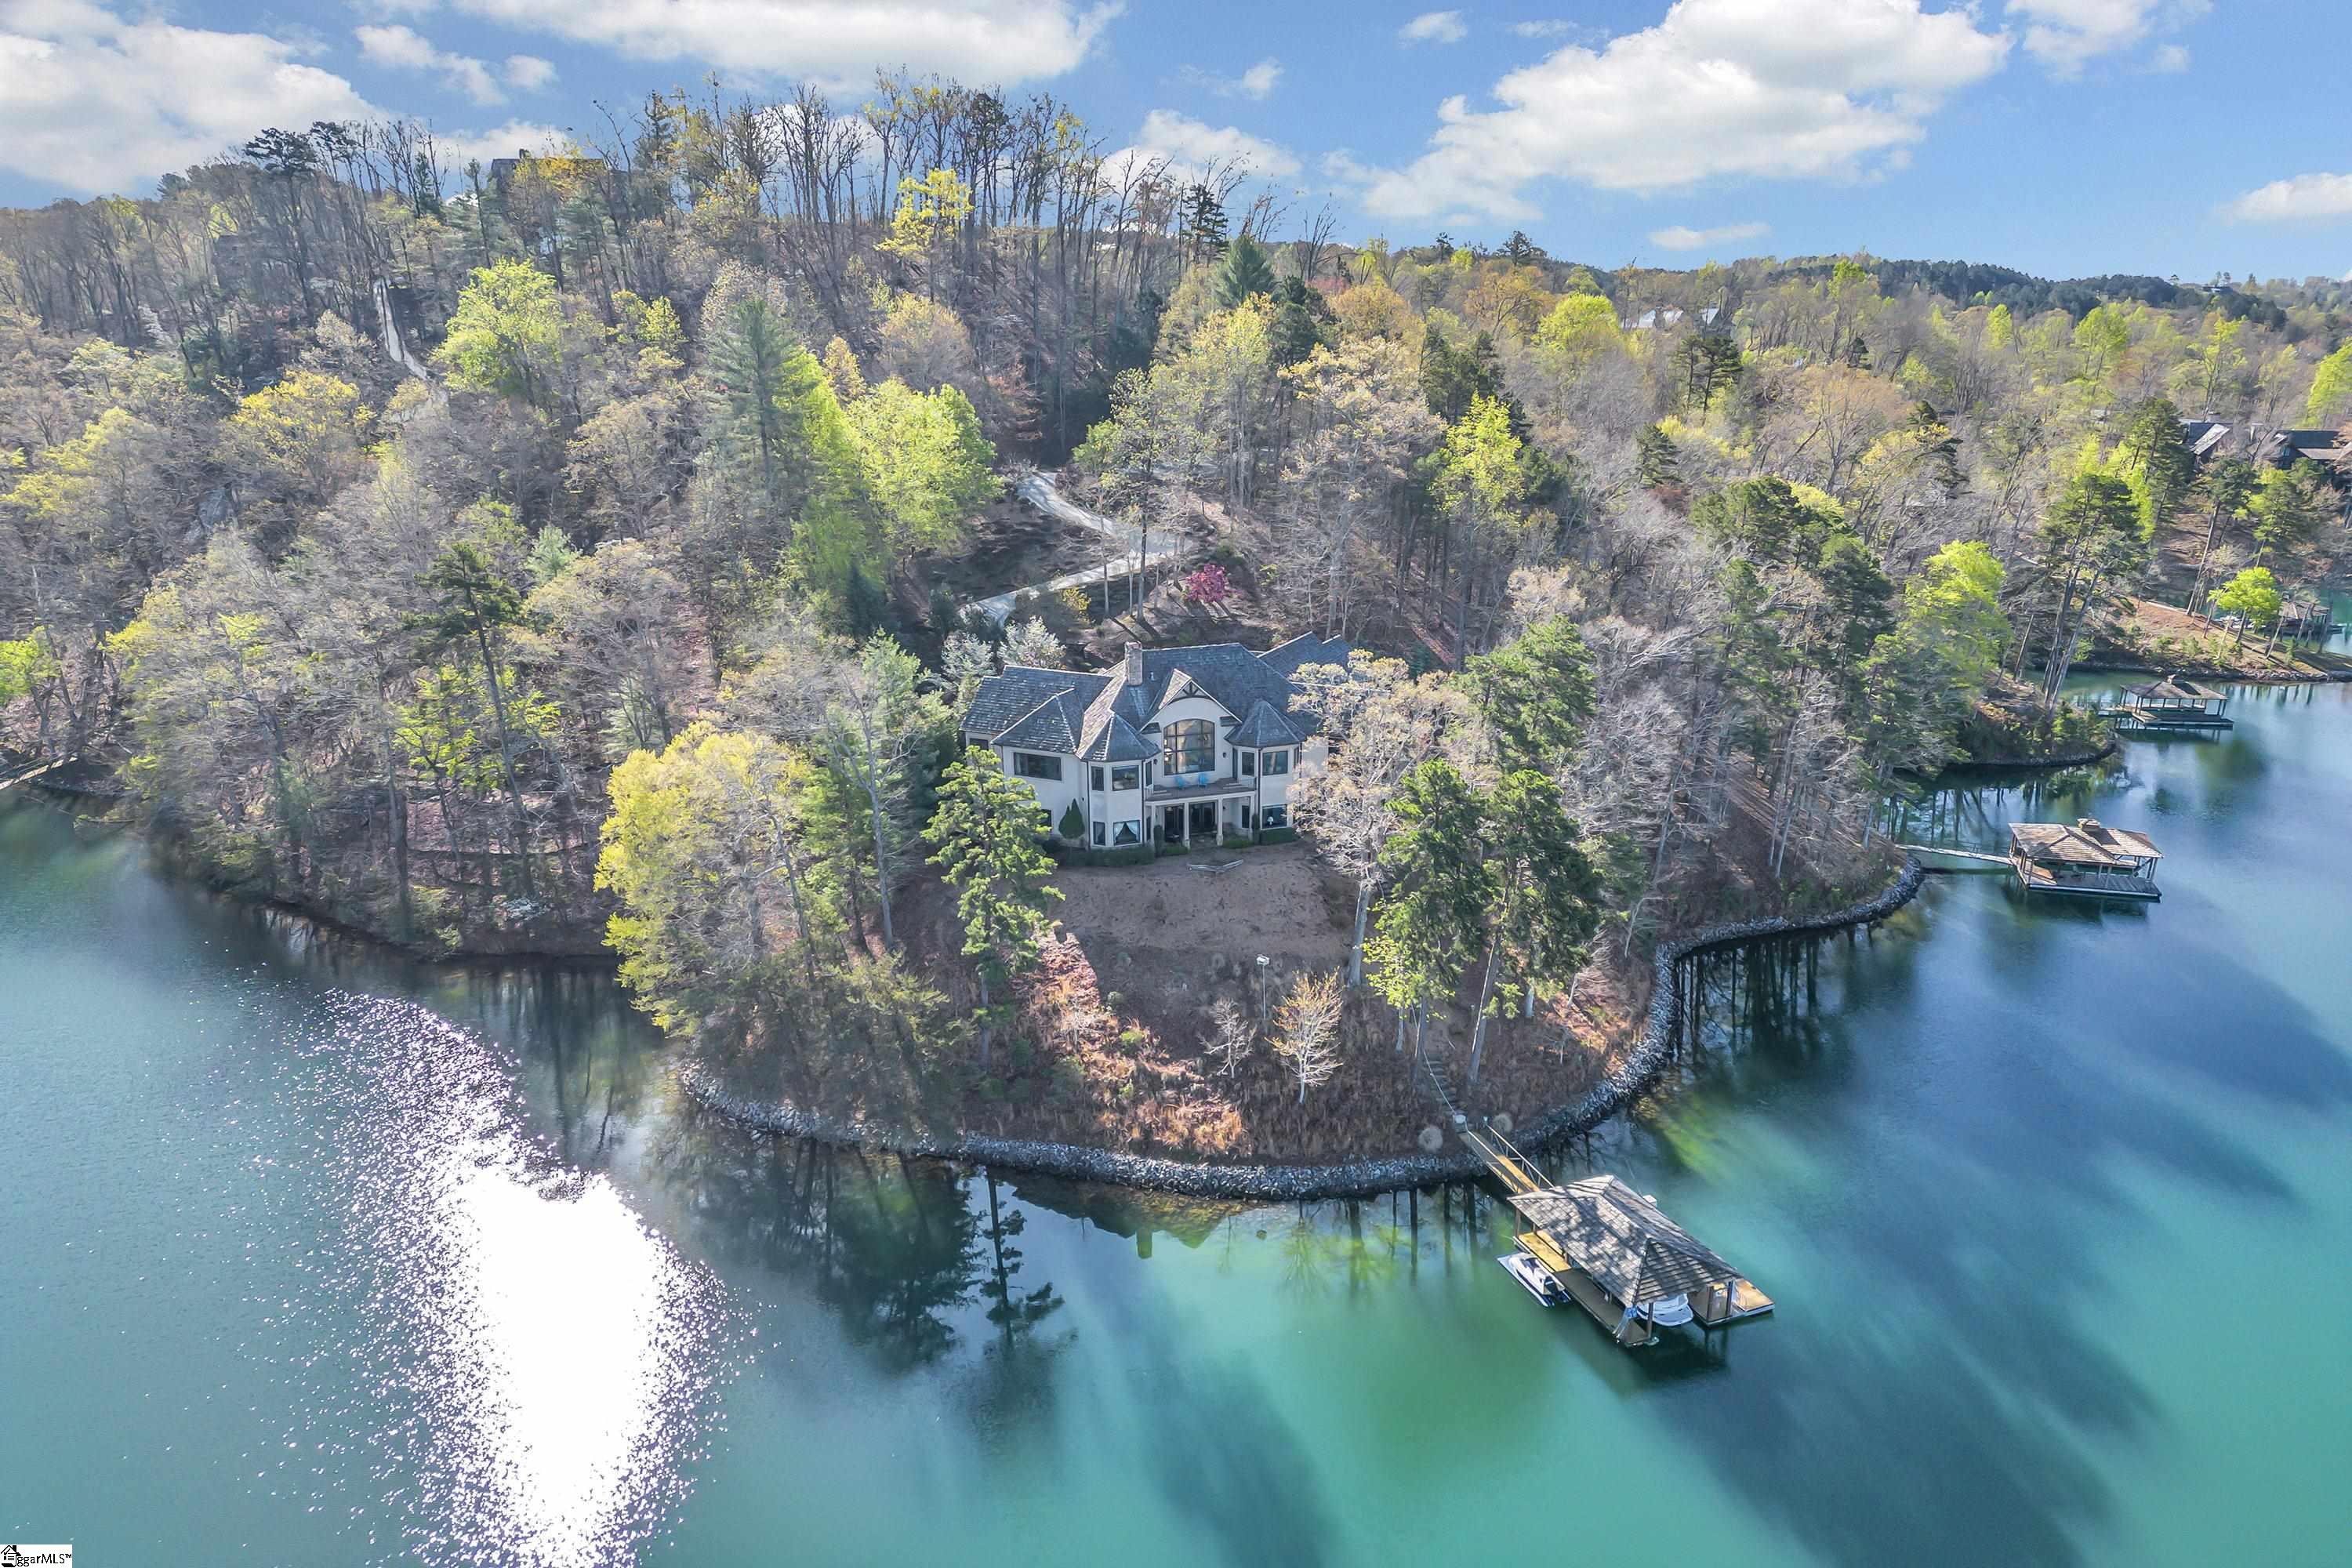 Located on an incredible point lot, 117 Misty Water Loop offers expansive and enviable views of serene open water. The front entrance with its commanding double doors gives the feel of a grand mountain lodge while striking turrets facing Lake Keowee are reminiscent of the European countryside. This home’s story is one of shape and texture as architectural details elevate both the exterior and interior spaces. With the distant Blue Ridge Mountains providing a wondrous backdrop, it is surrounded by idyllic landscaping.  Inside, a soft archway welcomes you to a vast open area where the big water itself is naturally part of the ambiance. The great room is anchored by a stone fireplace and has a built-in entertainment center and shelves and a refined vaulted ceiling juxtaposed beautifully with rustic beams. Have your morning meal or beverage in a bed and breakfast setting as you soak in the scenery from the dining area or spacious bar. The kitchen is equipped with a double-door stainless KitchenAid refrigerator, a wine refrigerator, a double oven, a five-burner Dacor gas cooktop, a large island with its own sink, a new dishwasher, soft-closing drawers, a walk-in pantry, and pendant and recessed lighting.  Warm hardwoods draw you through the main floor where you’ll find a soothing study with built-in shelving, cabinets, and a credenza, along with another splendid perspective of the water. Also located on the main level, the master suite features a wonderfully spacious walk-in closet/dressing area with tasteful storage solutions that make organization simple. Among the amenities of the master bath are heated floors, a zero-threshold walk-in shower with body sprayers, an inviting tub, and custom cabinetry.  A sweeping, curved staircase adds an elegant touch of distinction, but you can also take the elevator to the lower level where there are three bedrooms, two full baths, and an immense recreation room with 12-foot ceilings, tile flooring, a fireplace, and a bar. This area has a personality of its own but fits the character of this gorgeous property. The lower level also has a climate-controlled 2,000-bottle wine cellar, a workshop with room to provide inspiration for any project, utilities including two water heaters, and storage.  The three-car garage has epoxy flooring, a 50-amp charging station for an electric car, and an unfinished area above it that could be converted from storage to living space. The driveway has been replaced with concrete and expanded. The washer and dryer are new, and there’s ample storage, along with countertops for sewing, gift-wrapping, or any task made less laborious by the large laundry room. Additional highlights include a central vacuum, a new generator that serves the entire house, speakers throughout the home, and Pella windows.  In addition to the plethora of interior options, you can enjoy thoughtfully designed exterior sites on both levels where the vistas are immersive. The screened-in porch has a fireplace, a covered area with doors for the TV, and a grilling deck. All the decking is maintenance-free Trex®. Lower-level patios and boulder steps make for easy access to 288 feet of perfectly finished, riprapped shoreline via a high-quality Ipe wood Reserve dock with a cedar shake roof. Don’t let too many sunsets pass without a view from Misty Water Loop. The Reserve features over $100 million in amenities, recently announced new additions will include 12 hole par 3 course, sporting clays, lighted range and putting green.  This property has Full Membership allowing buyer to purchase Premier, Sports or Social Membership at closing.